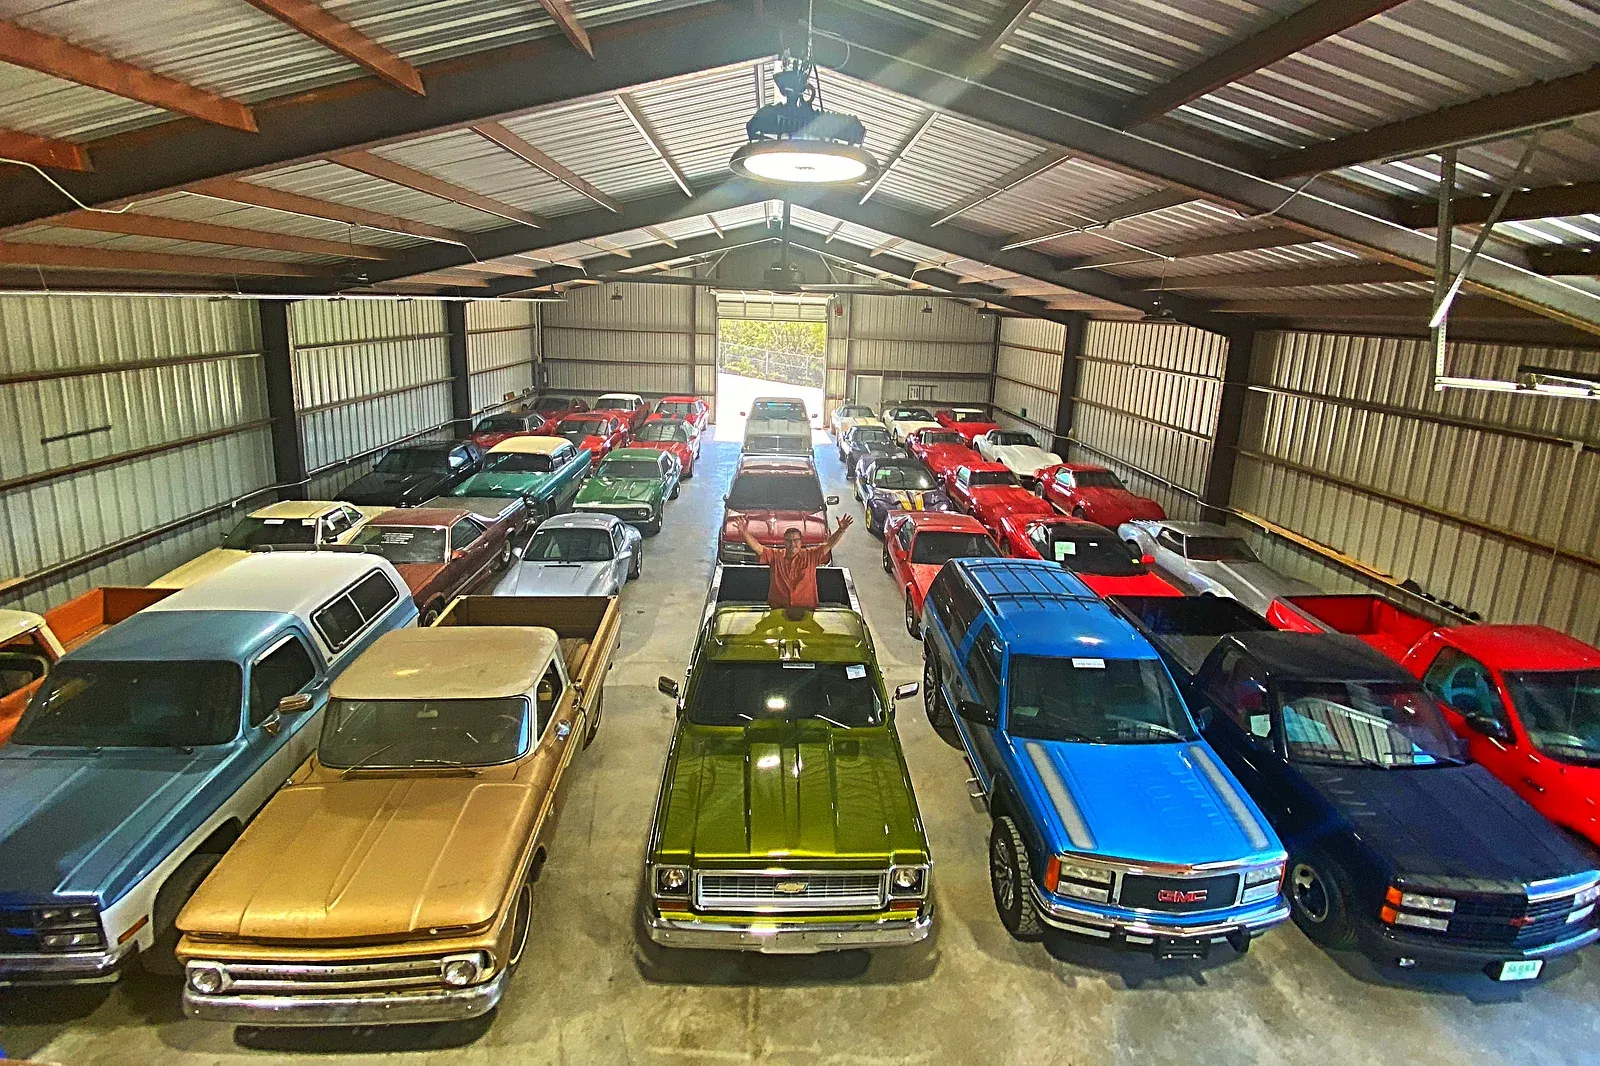 Treasures Unearthed: Exceptional 23-Car Collection Found in Alabama